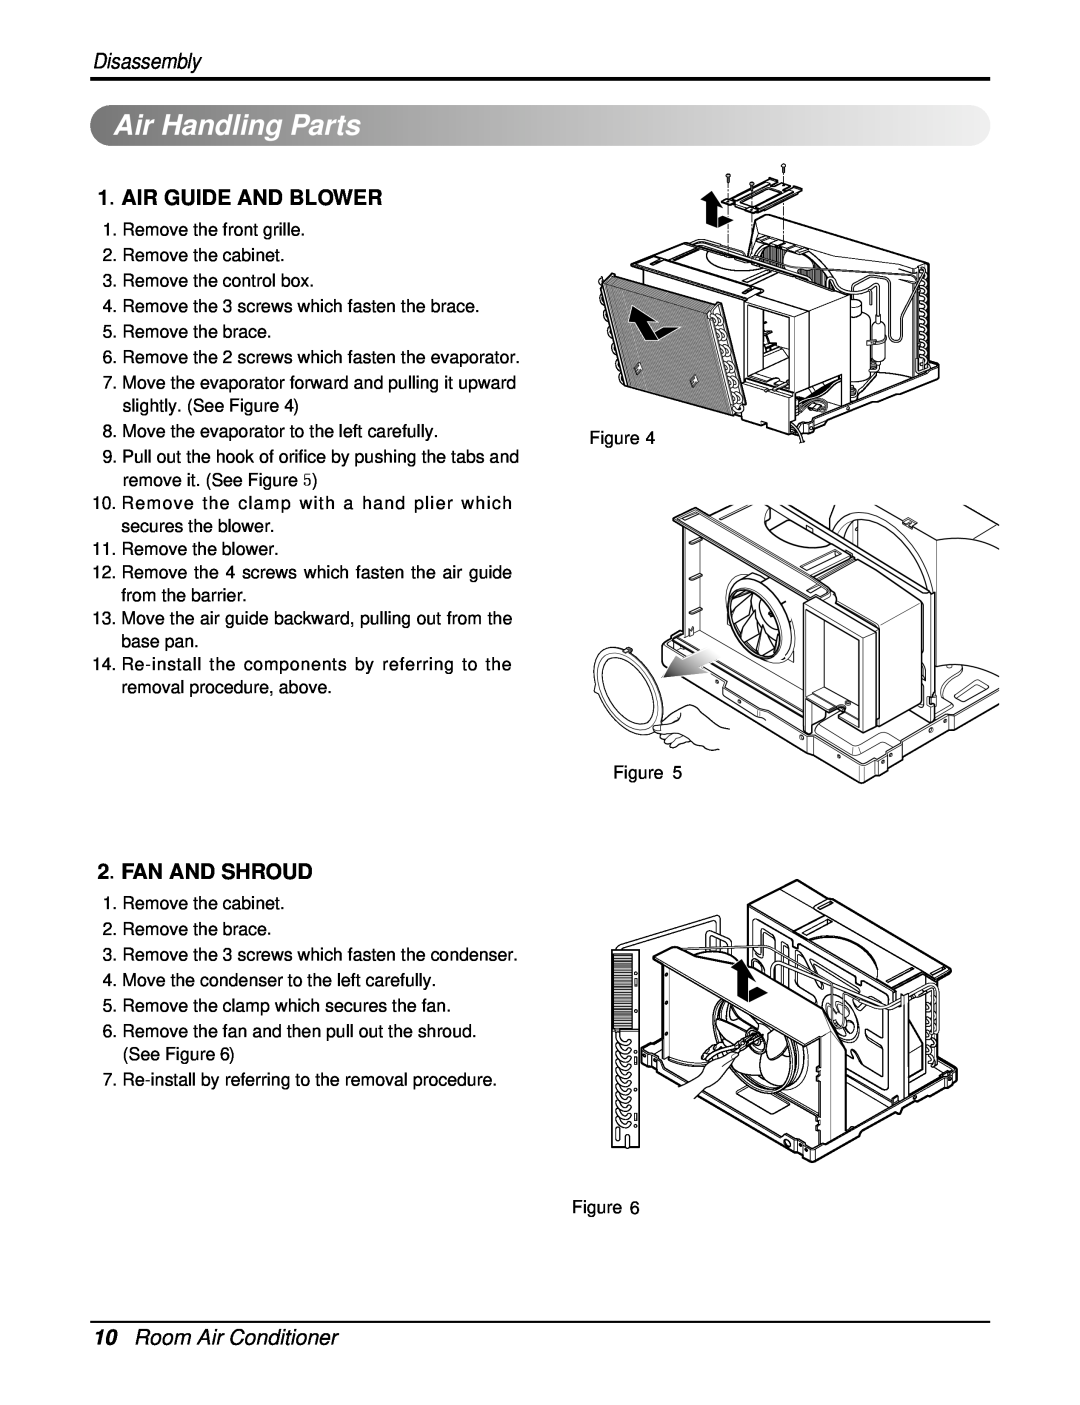 Friedrich CP06F10, CP08F10 manual AirHandlingParts, Disassembly, Air Guide And Blower, Fan And Shroud, Room Air Conditioner 